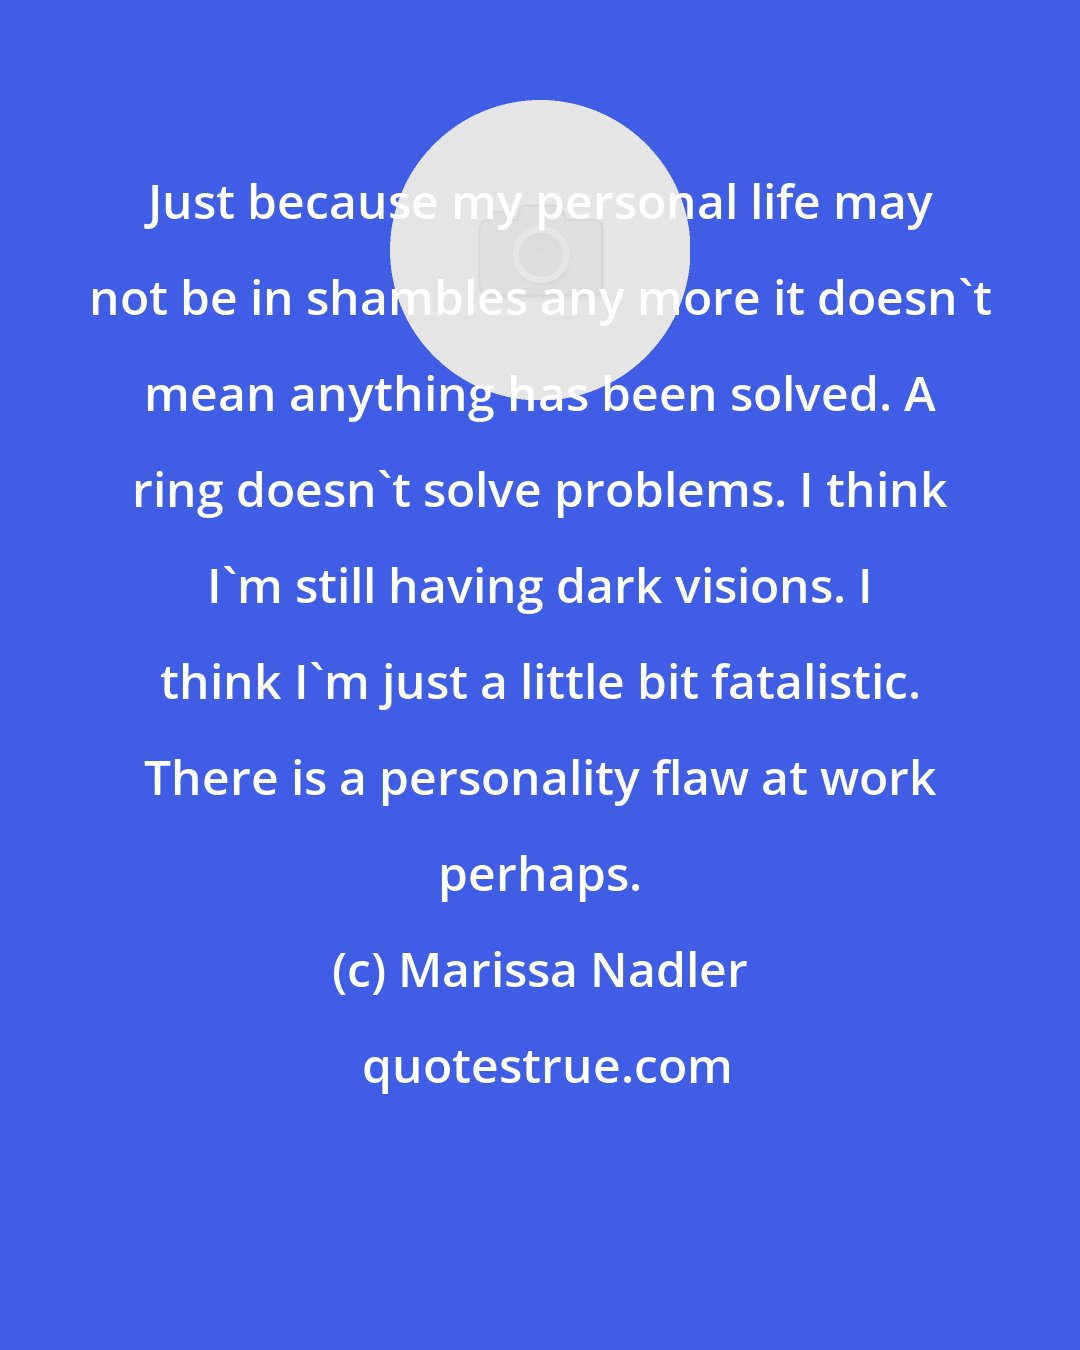 Marissa Nadler: Just because my personal life may not be in shambles any more it doesn't mean anything has been solved. A ring doesn't solve problems. I think I'm still having dark visions. I think I'm just a little bit fatalistic. There is a personality flaw at work perhaps.